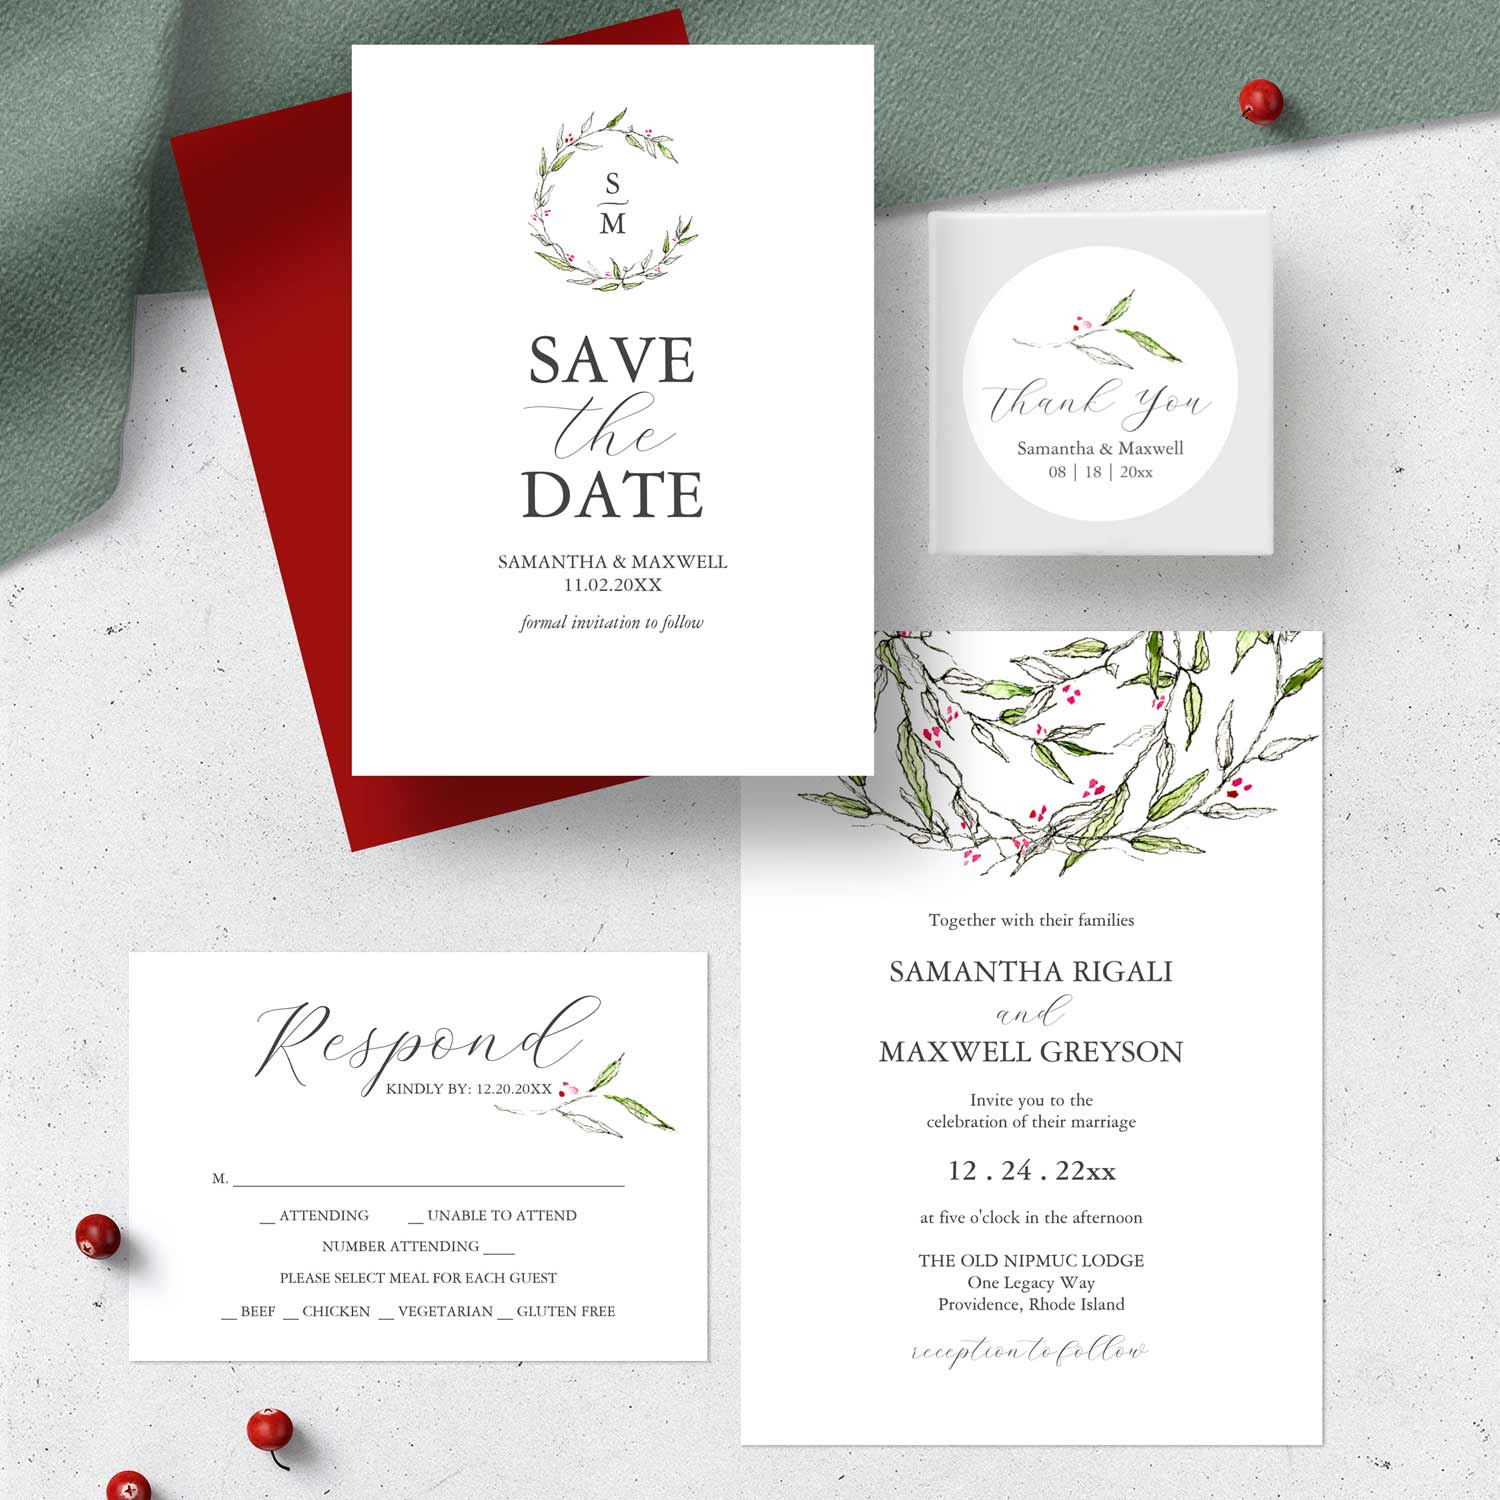 Christmas wedding invitation theme features unique art by Victoria Grigaliunas of Do Tell A Belle